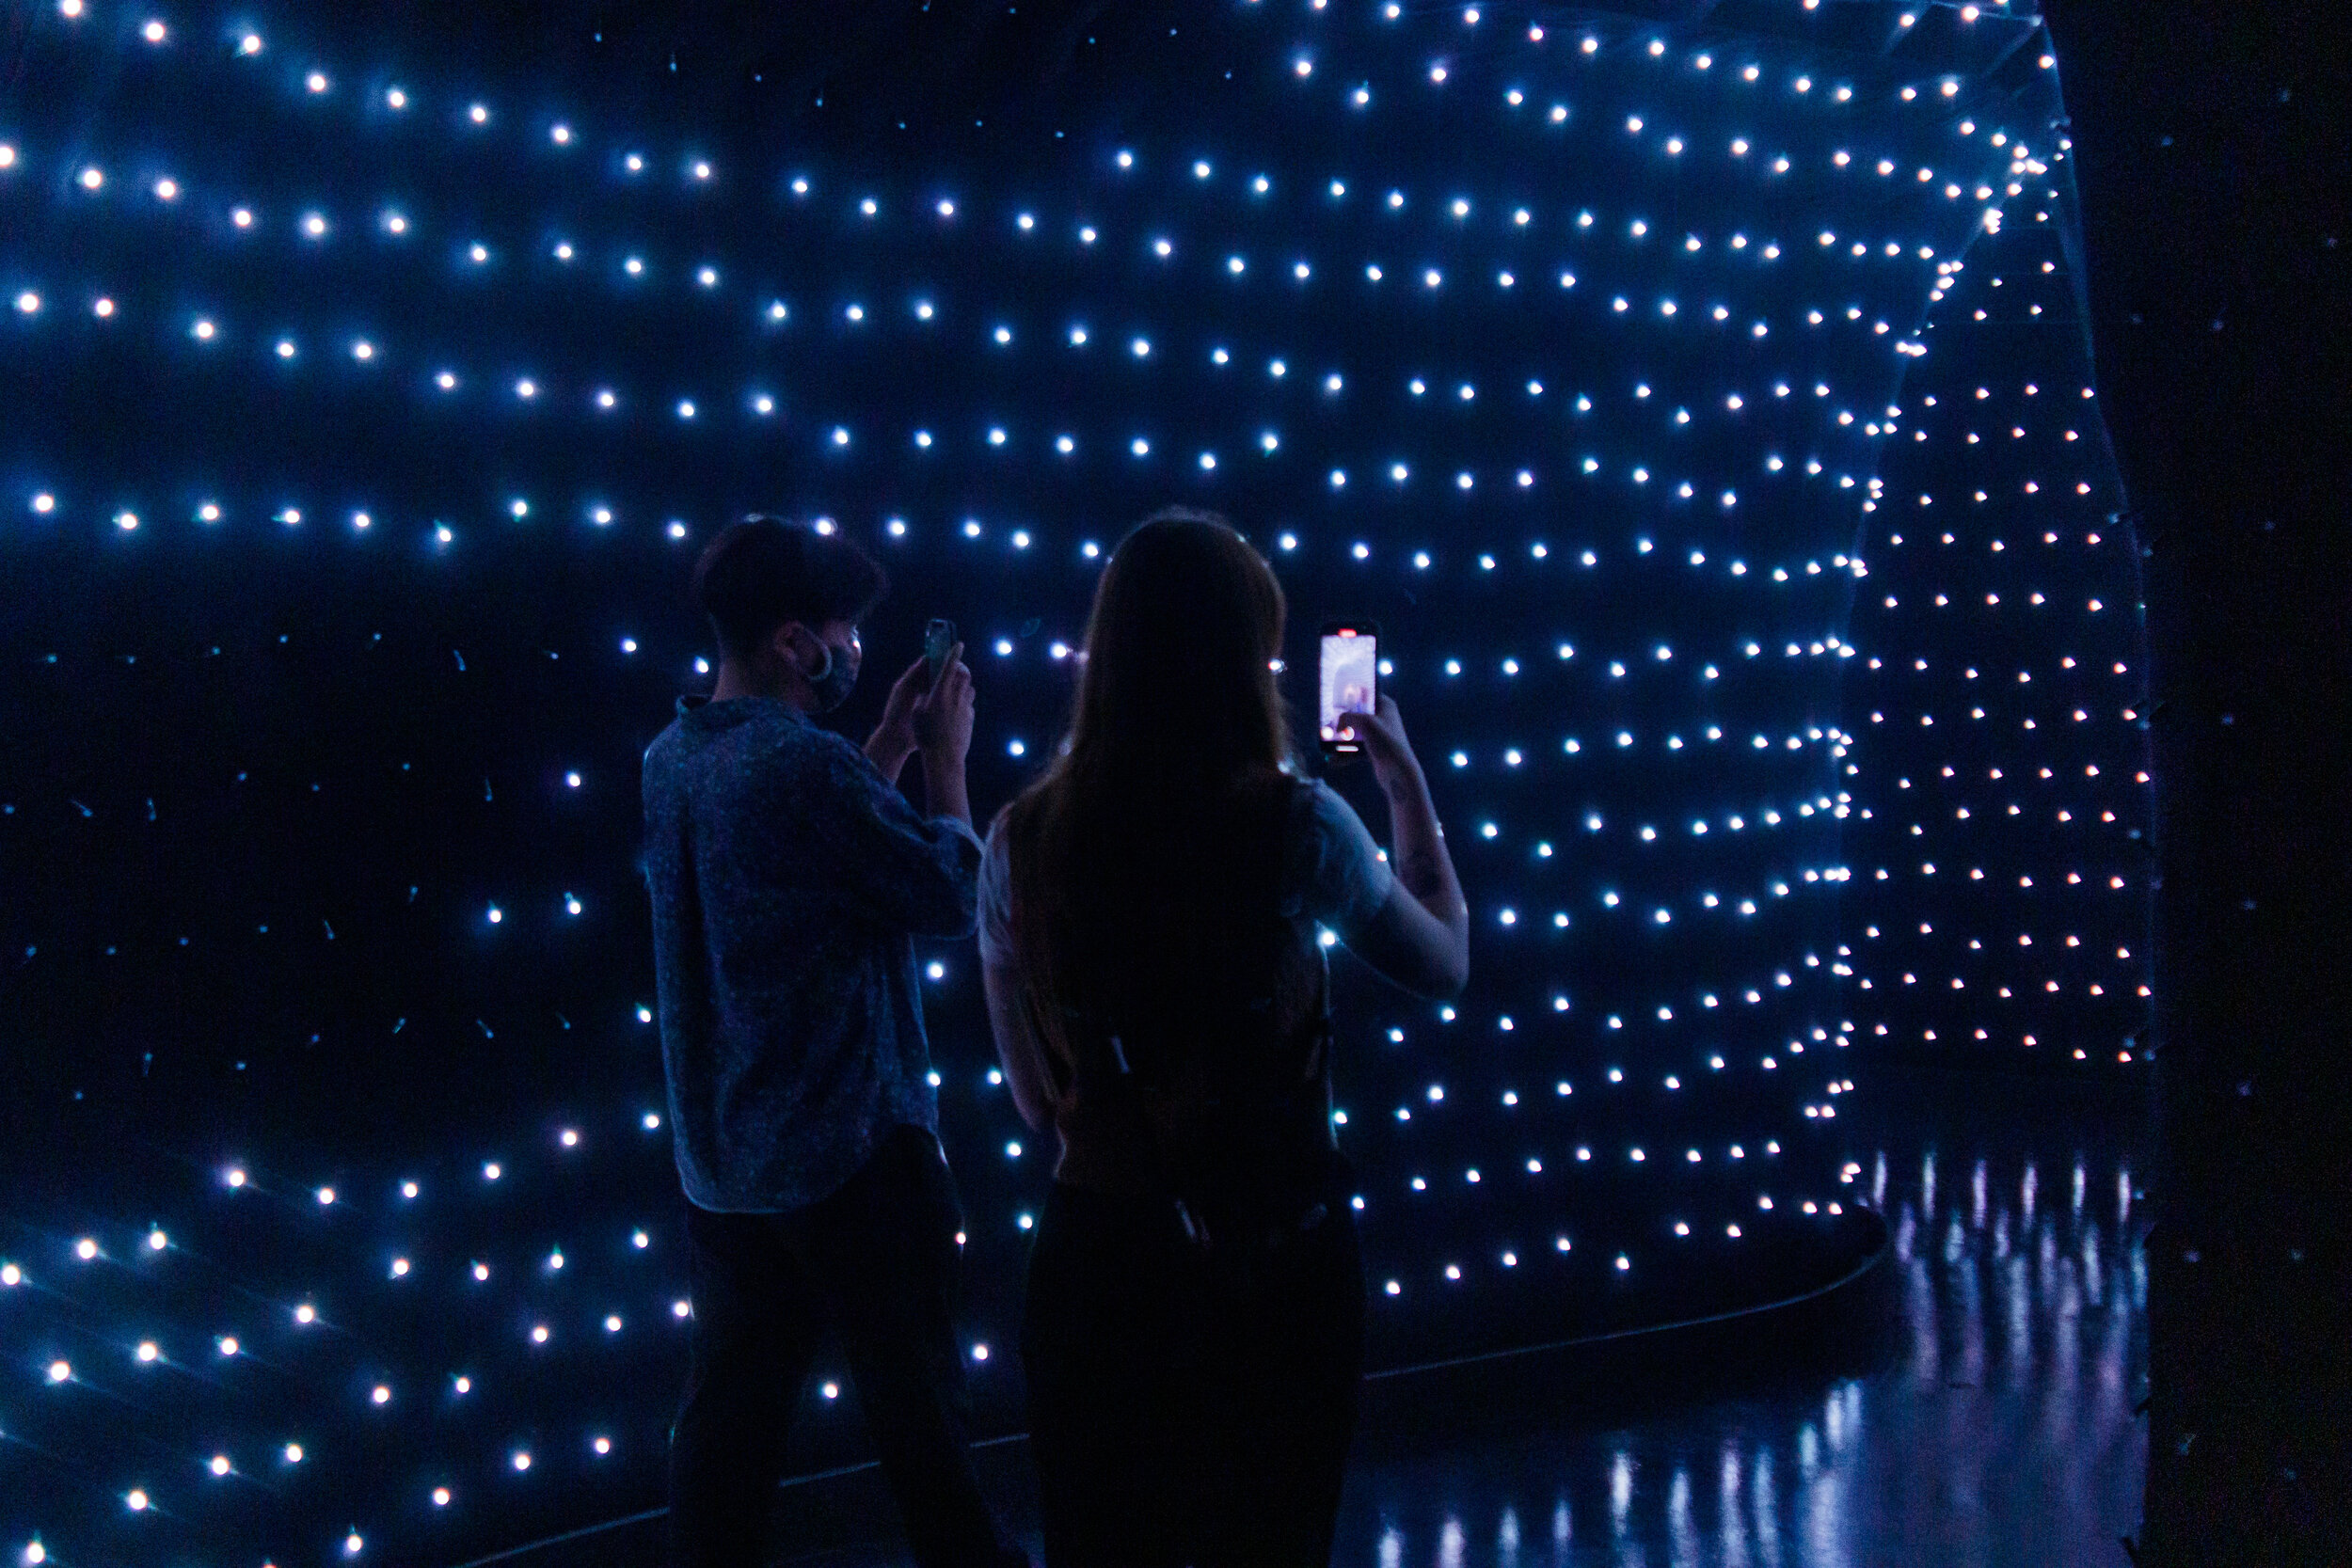   Visitors enter the immersive part of the experience through a tunnel lit by thousands of tiny lights, at the Madcap Motel, in downtown Los Angeles, Calif., on Saturday, May 8, 2021. Marco Pallotti | The Corsair  